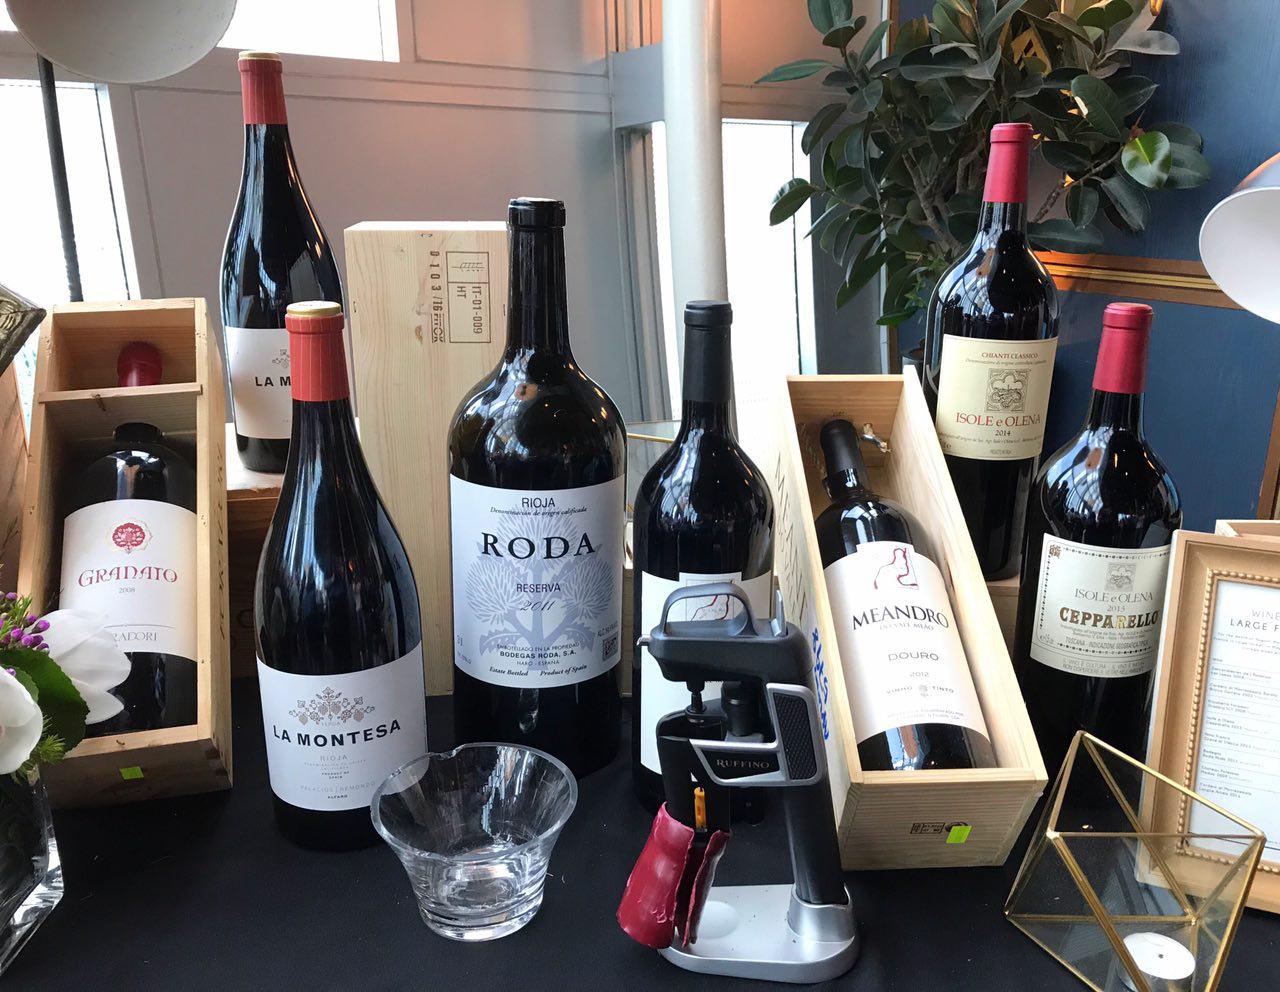 Drink old world wines from magnum and jeroboam bottles at Monti